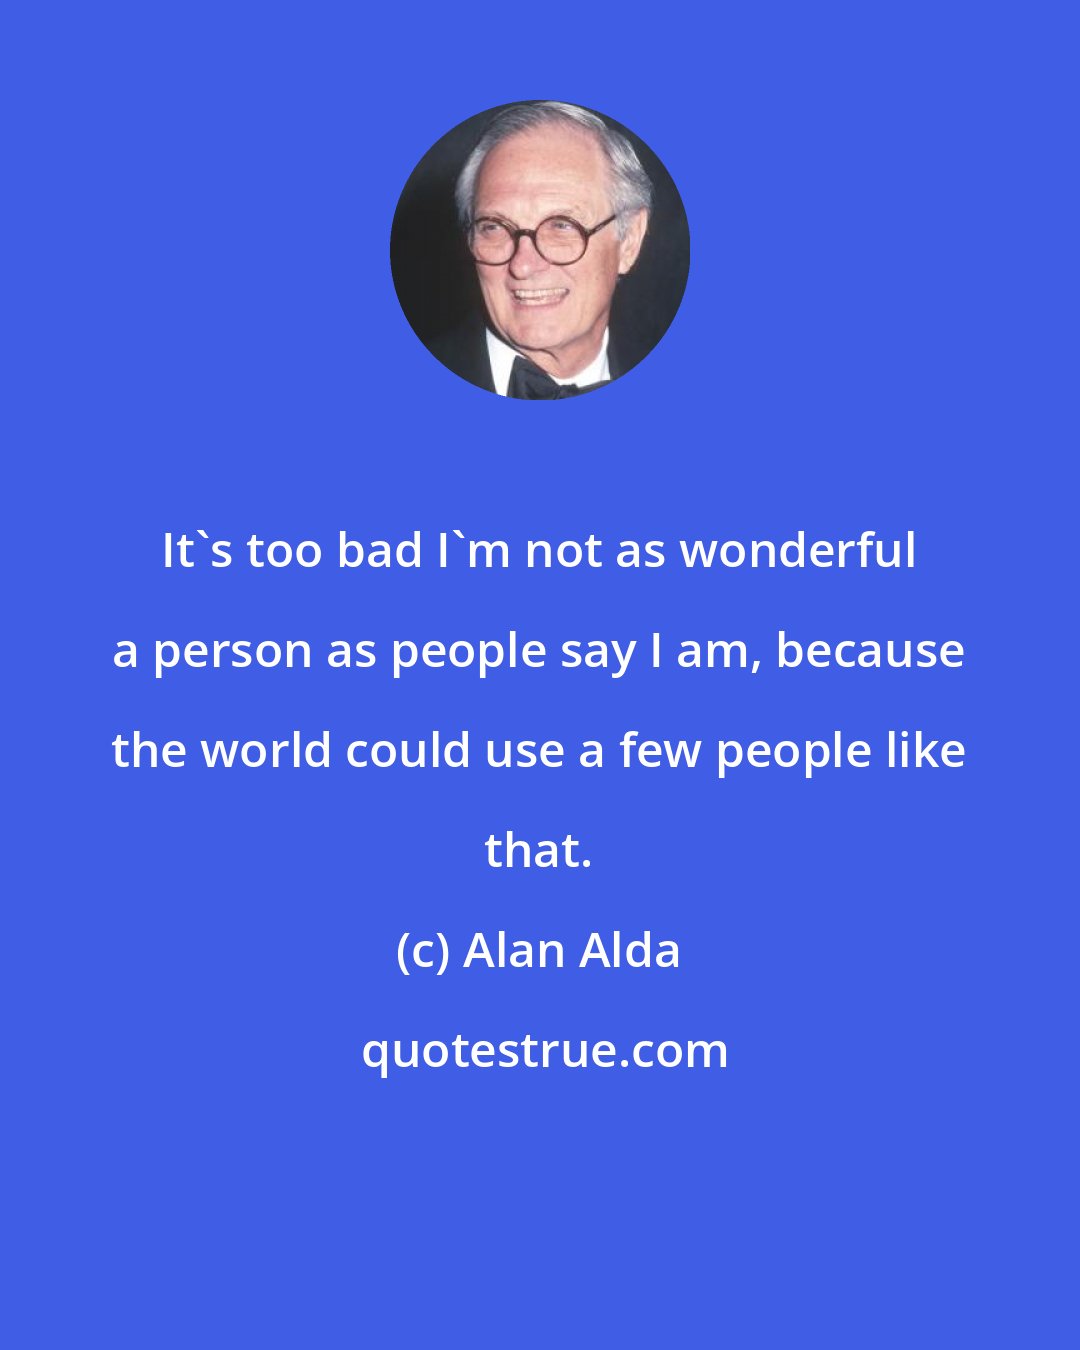 Alan Alda: It's too bad I'm not as wonderful a person as people say I am, because the world could use a few people like that.